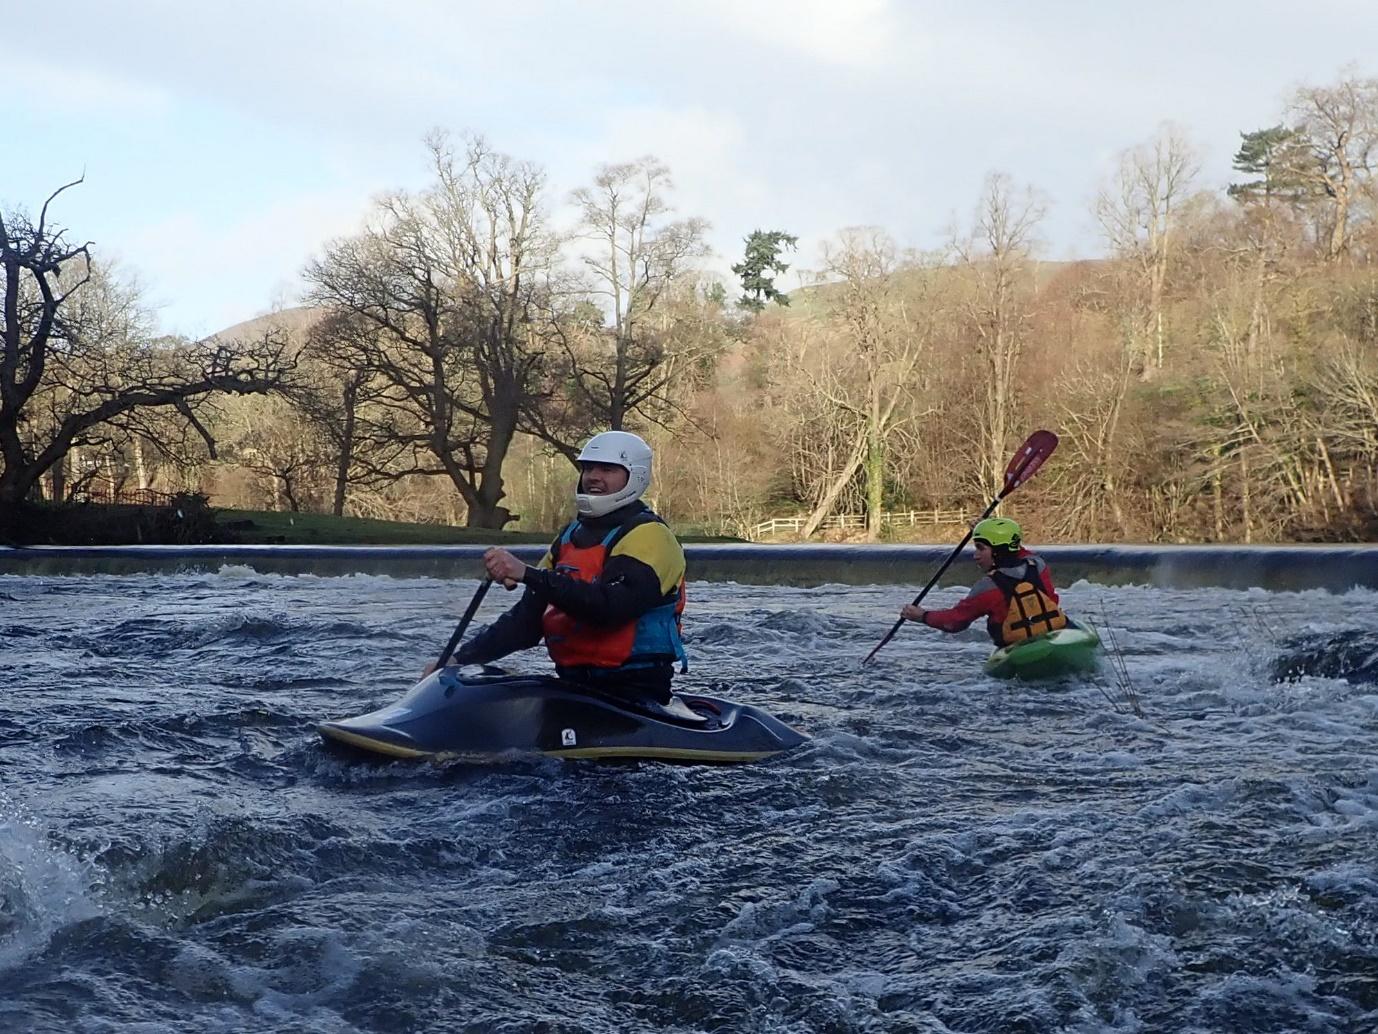 A group of people in kayaks on a river

Description automatically generated with low confidence